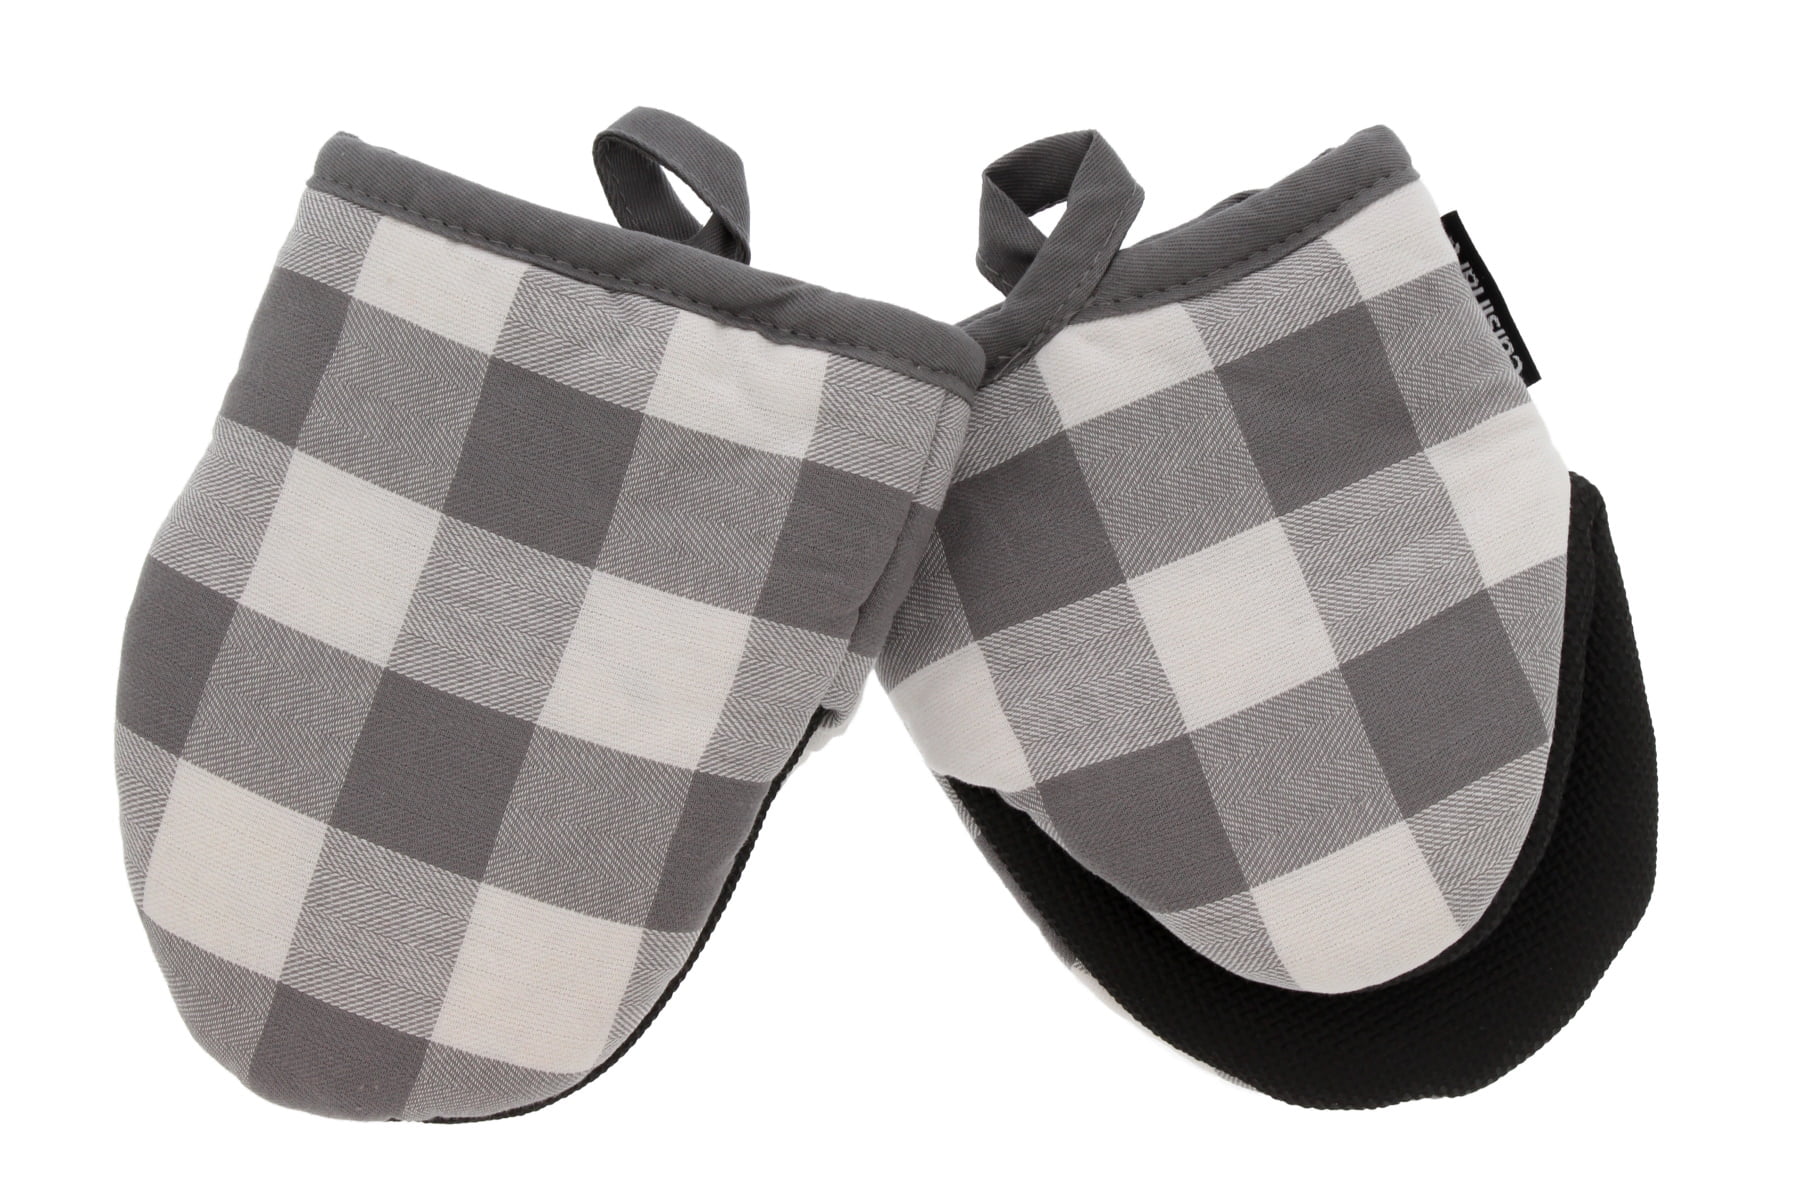 Cuisinart Neoprene Mini Oven Mitts 2pk-Heat Resistant Oven Gloves Protect Hands and Surfaces with Non-Slip Grip and Hanging Loop-Ideal Set for Handling Hot Cookware Grey Bakeware-Twill Stripe Titan